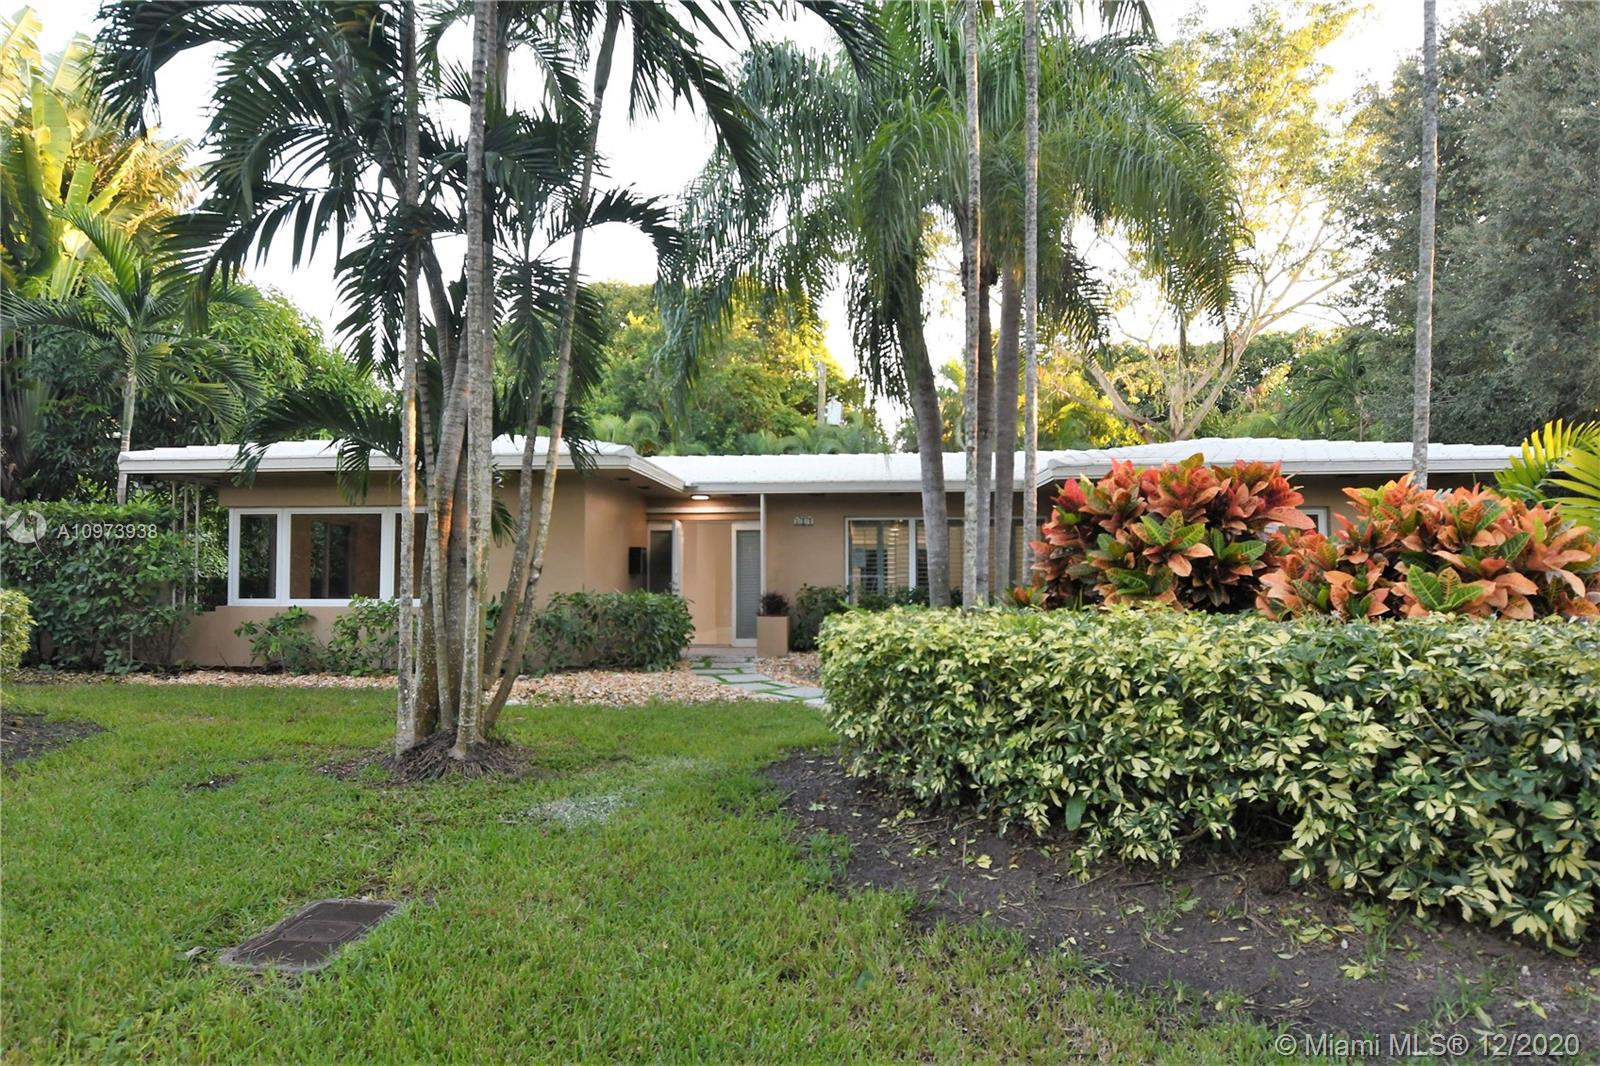 Photo 1 of 314 Manor Pl in Coral Gables - MLS A10973938